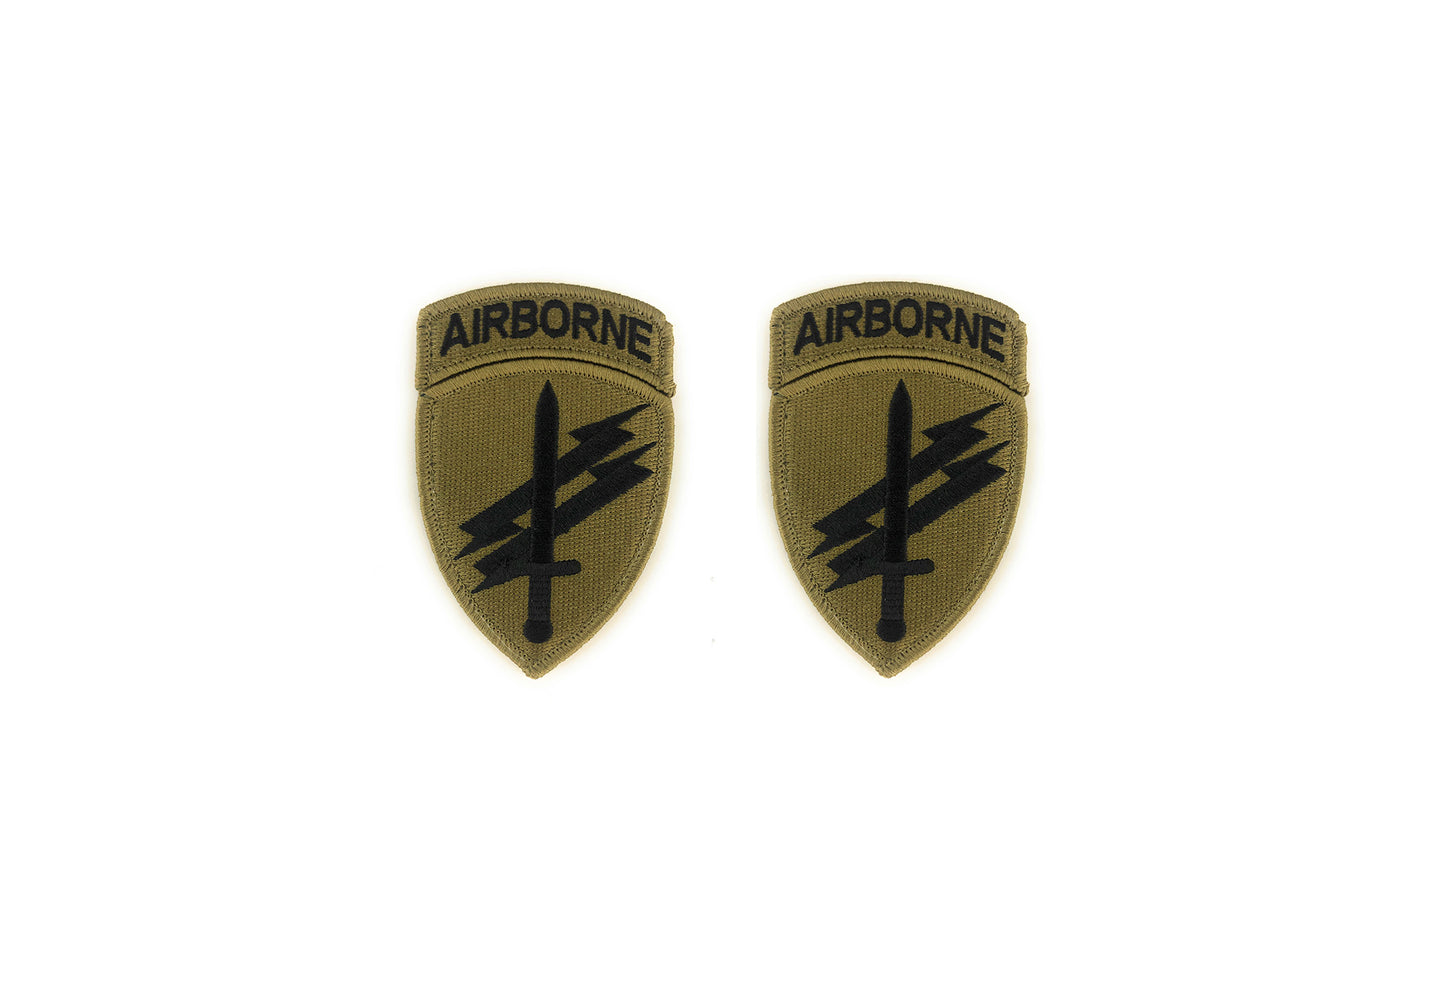 U.S. Army Civil Affairs and Psych Ops OCP Patch with Airborne Tab with ...